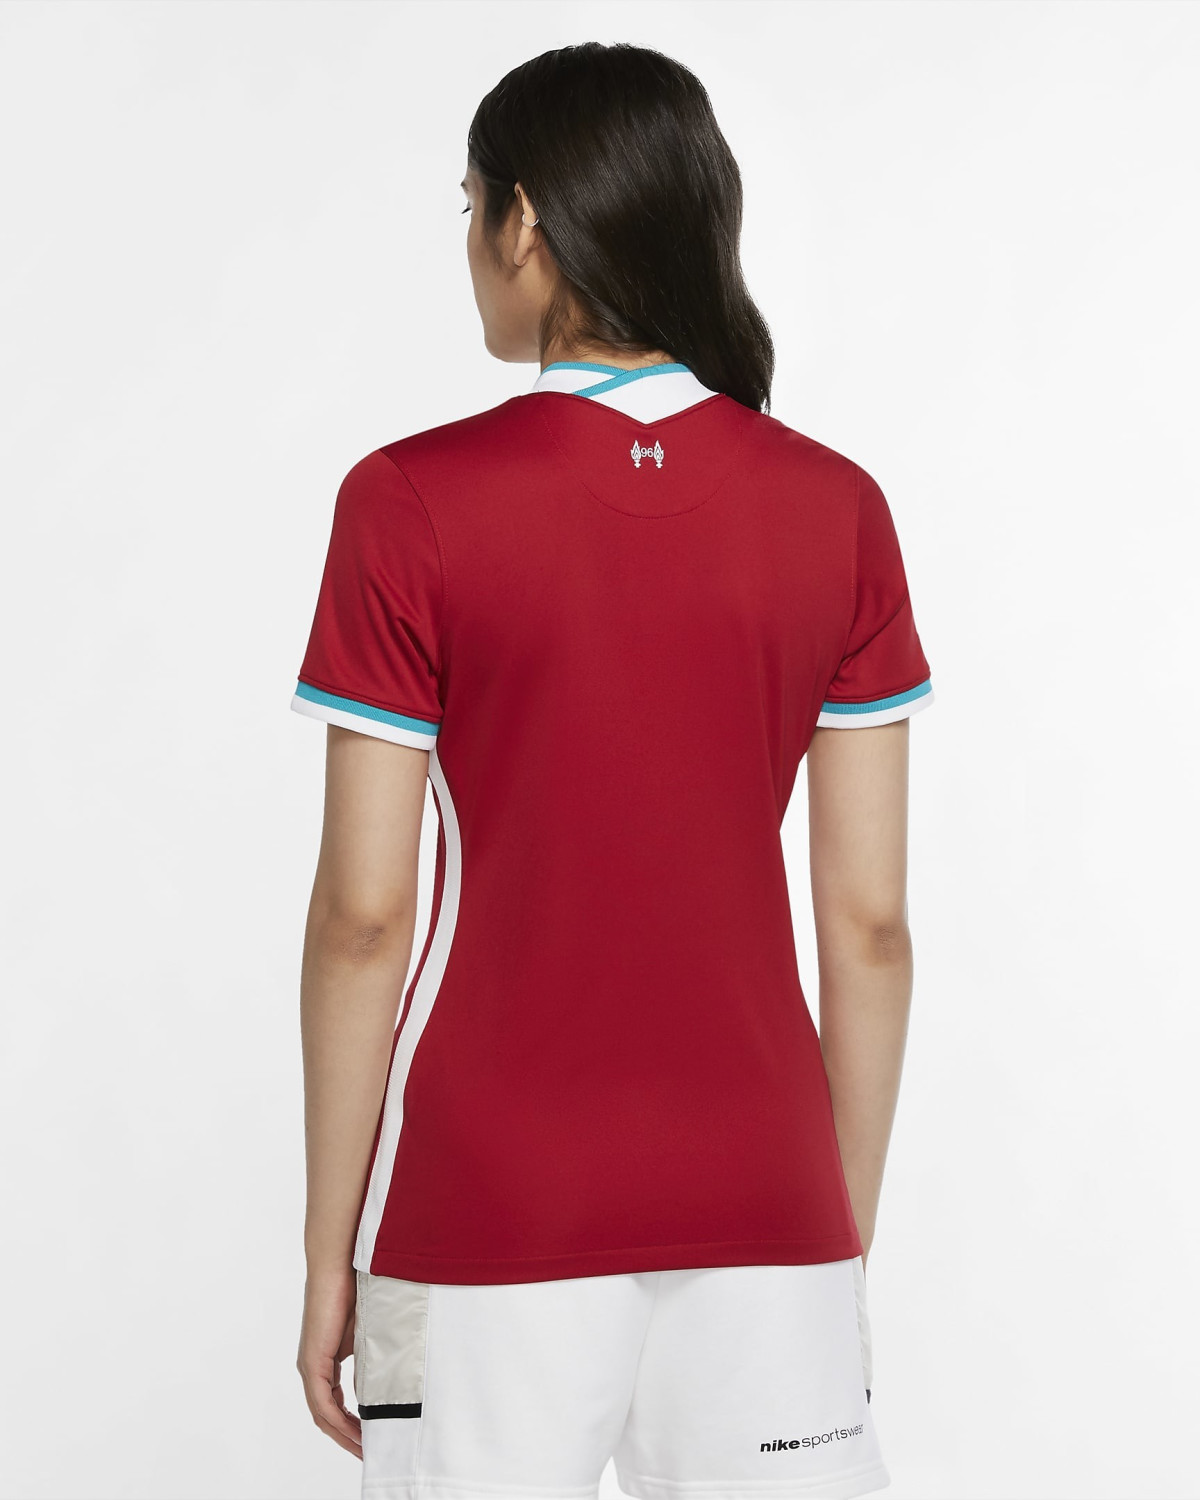 Buy Nike Liverpool Home Shirt Women 2021 from £30.00 (Today) – Best ...